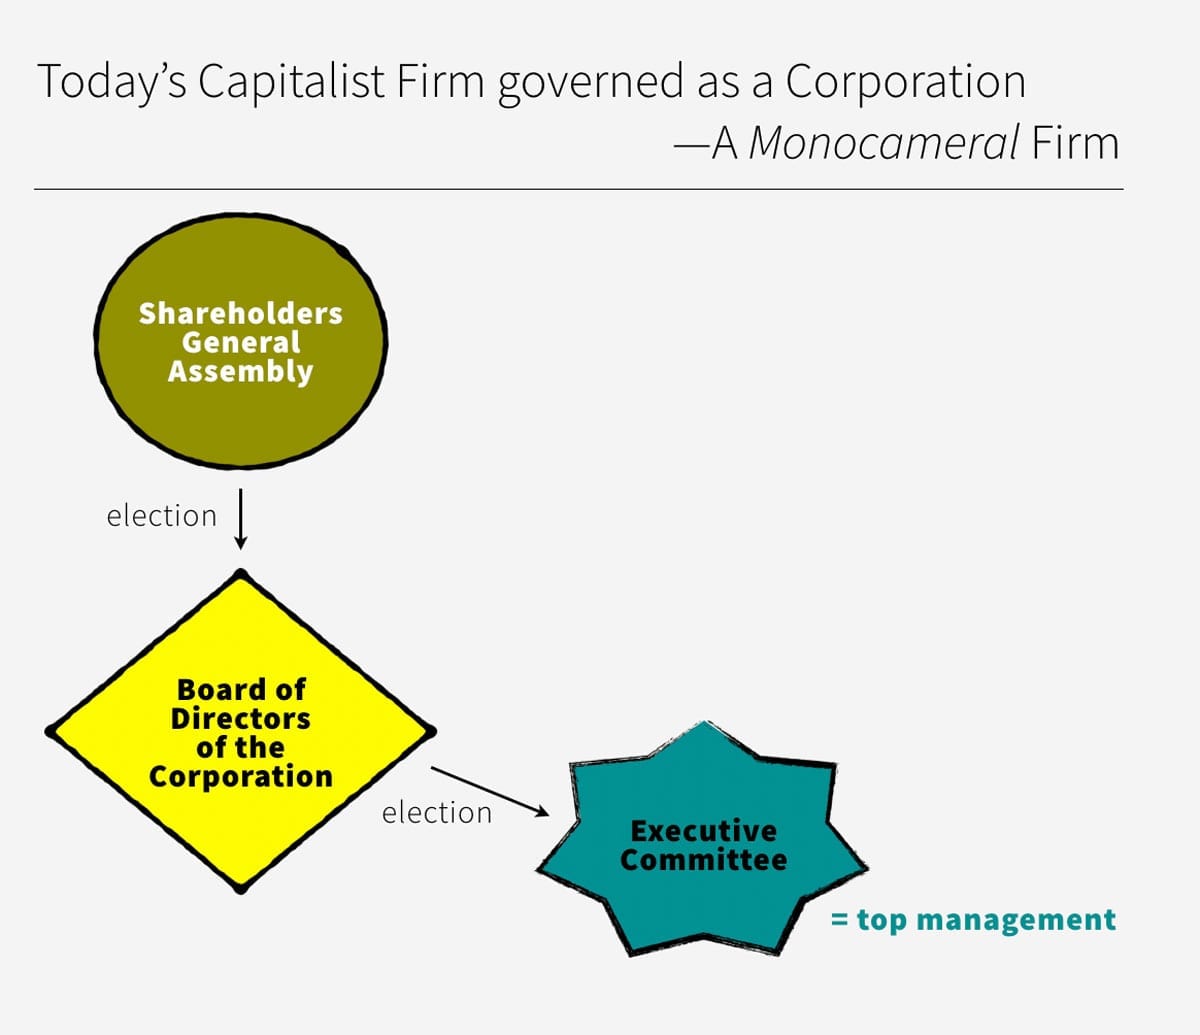 01 Today’s Capitalist Firm governed as a Corporation—A Monocameral Firm